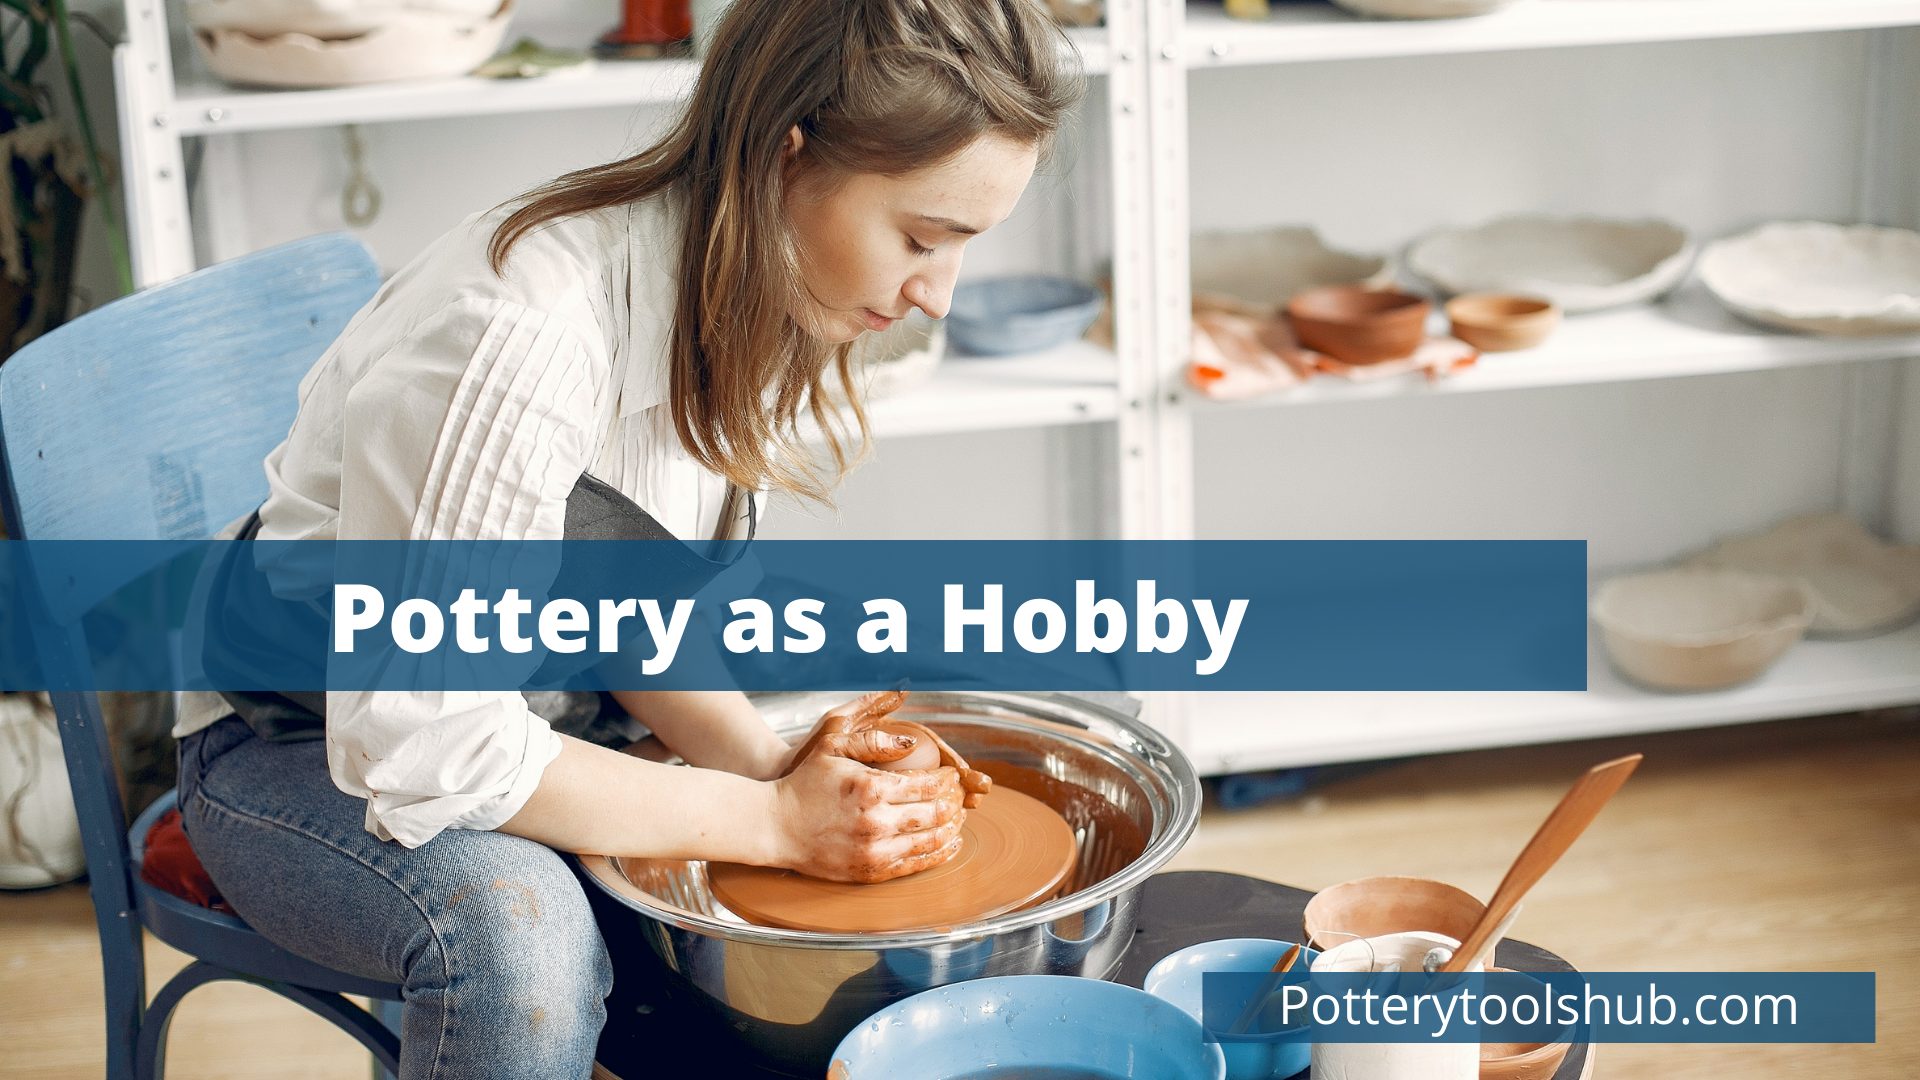 Pottery as a Hobby